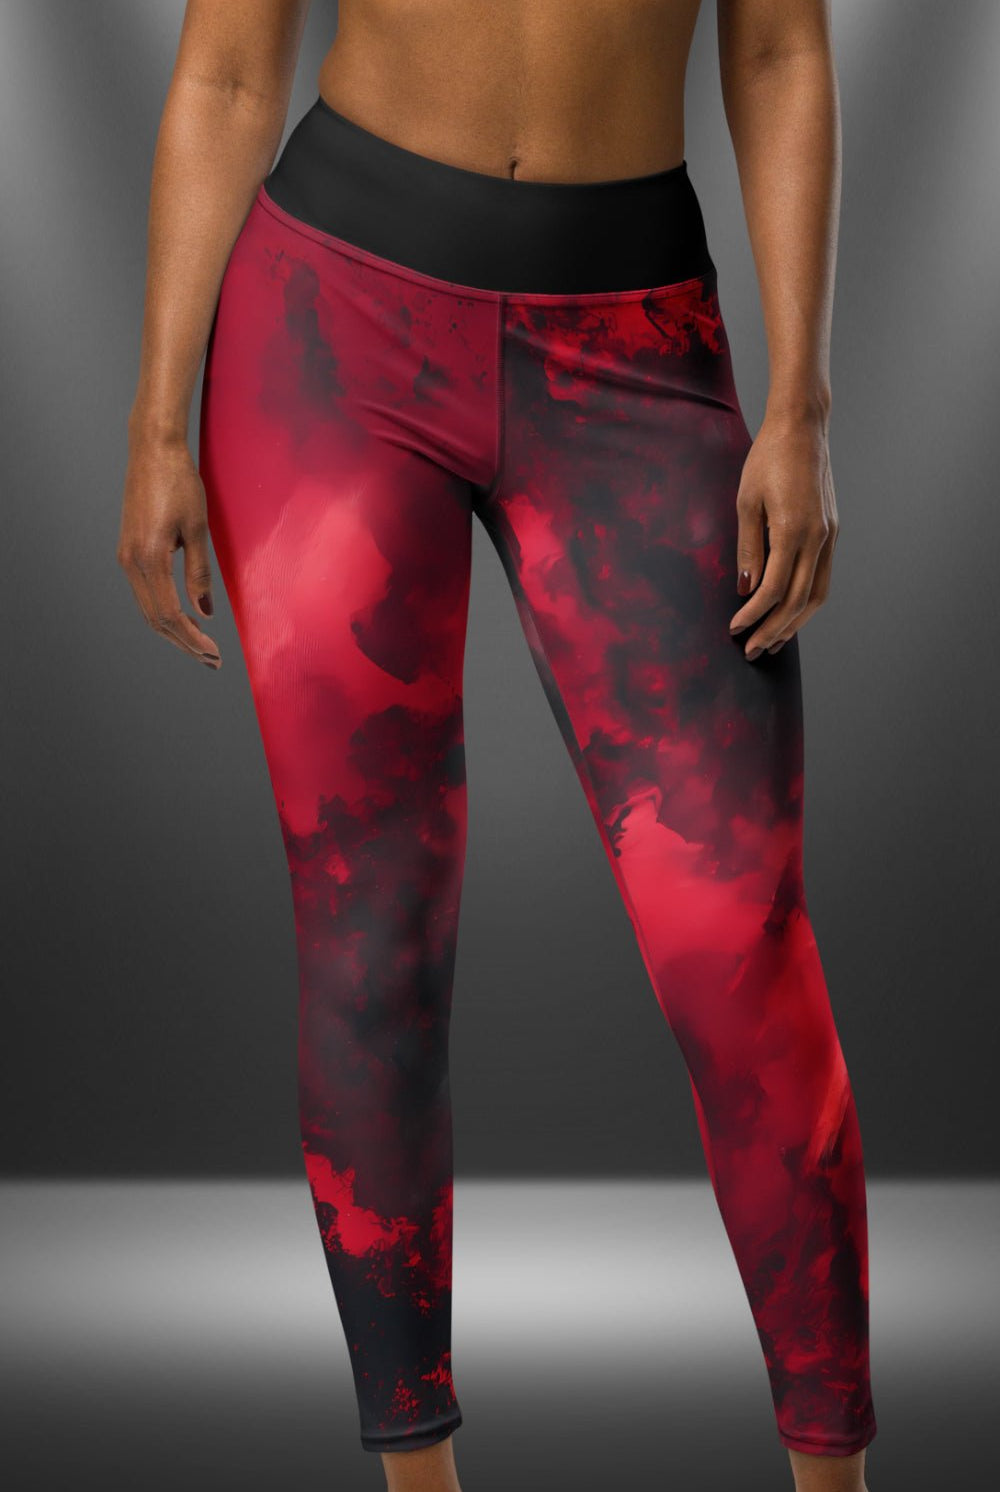 Dragon Foxx™ Red and Black Particle Yoga Leggings - Dragon Foxx™ Yoga Leggings - DRAGON FOXX™ - Dragon Foxx™ Red and Black Particle Yoga Leggings - 2549769_8353 - XS - Red / Black - Dragon Foxx™ - Dragon Foxx™ Particle Yoga Leggings - Dragon Foxx™ Red and Black Particle Yoga Leggings